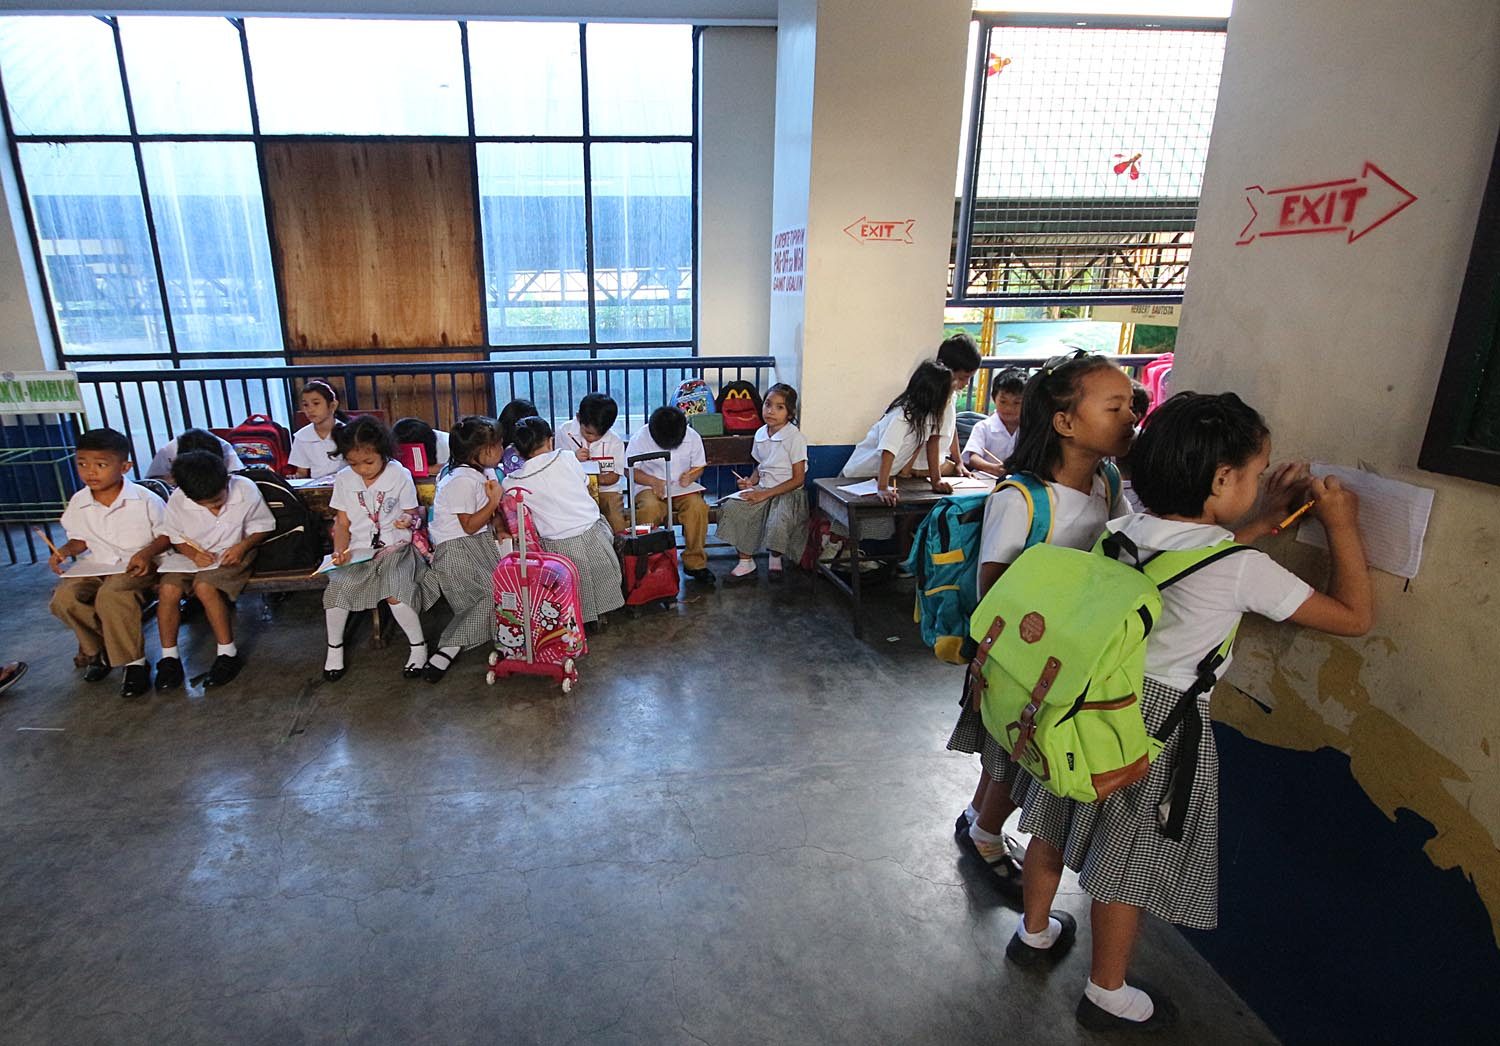 SCHOOL OPENING. Grade 1 students hold classes at a hallway of the Belmonte Elementary School in Holy Spirit, Quezon City during the start of classes on June 5, 2017. Photo by Darren Langit/Rappler   